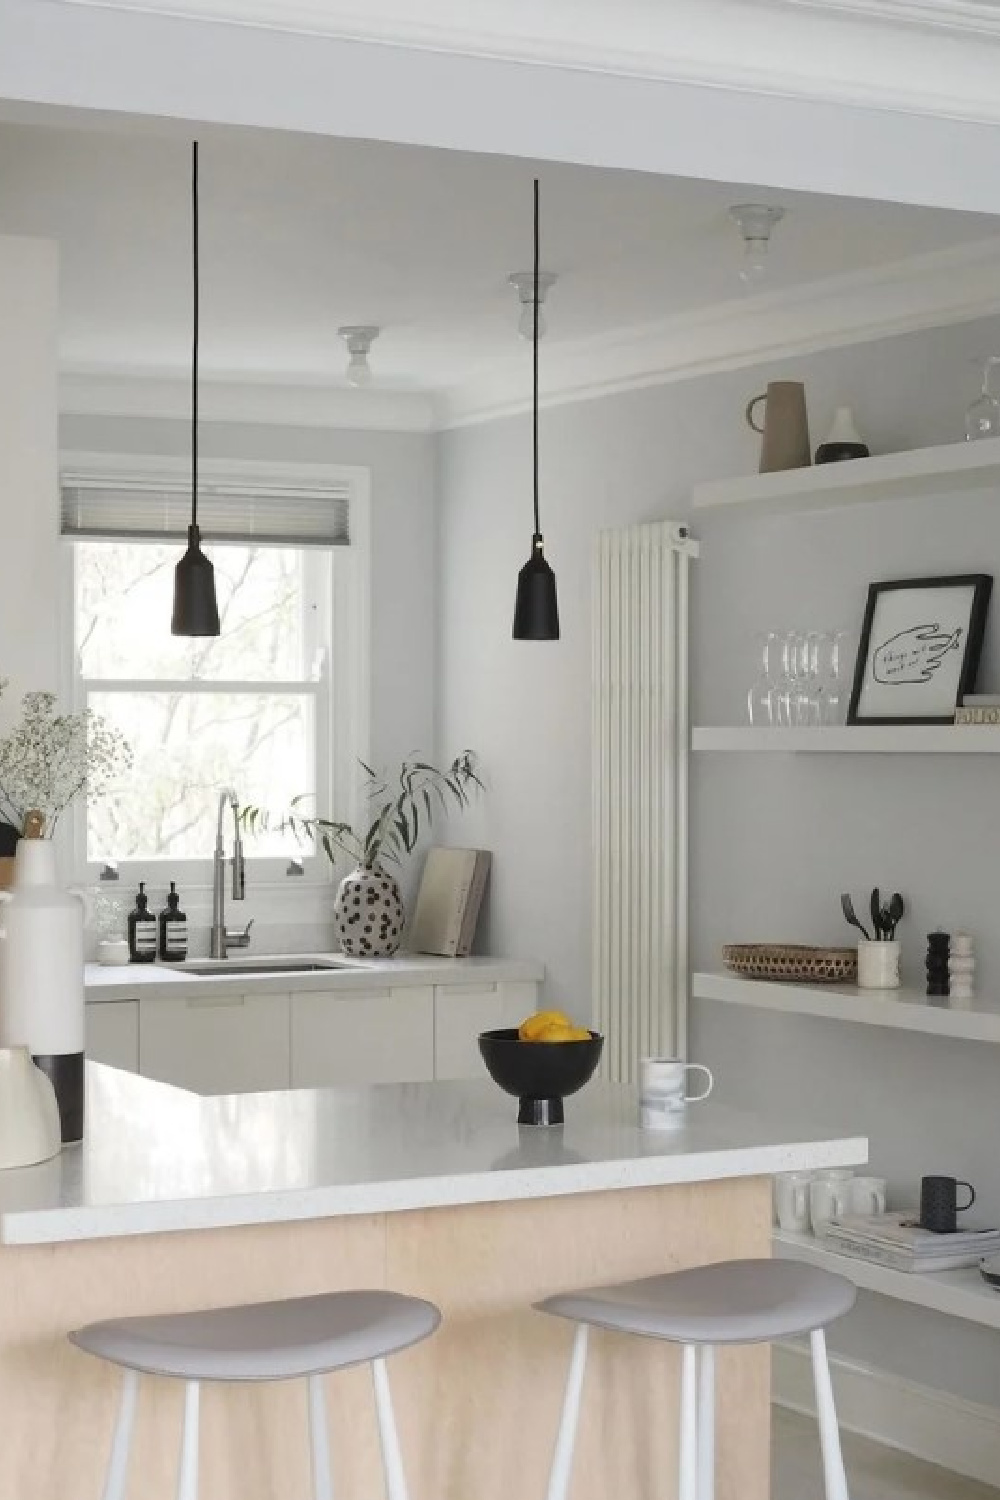 Blackened (Farrow & Ball) paint color in a kitchen - @cateshill. #blackened #paintcolors